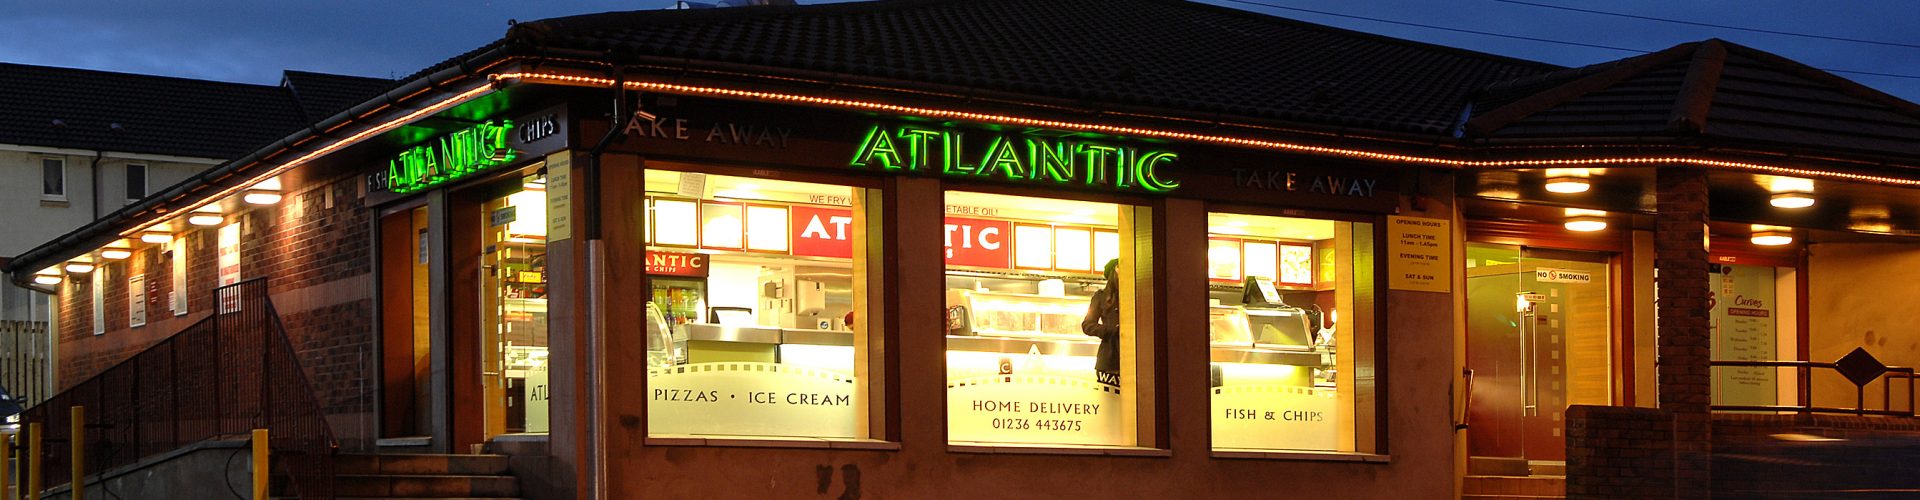 atlantic building outside at night